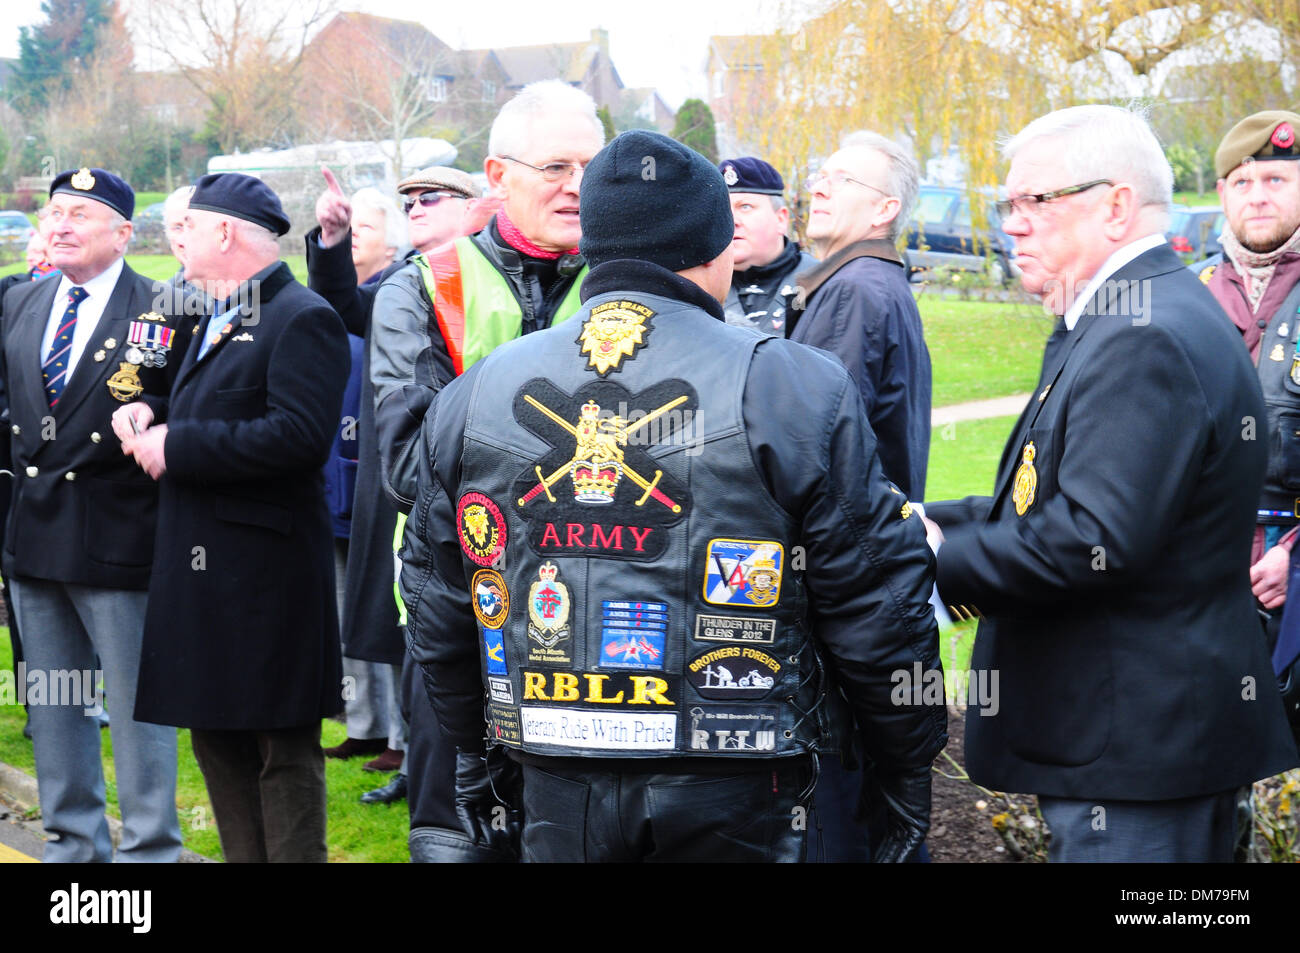 Eastbourne, East Sussex, UK. 12th December 2013. At least 120 people attended Robert Argyles funeral service at Eastbourne Crematorium to pay respects to the former Bomber Command pilot who passed away aged 92. Credit:  David Burr/Alamy Live News Stock Photo